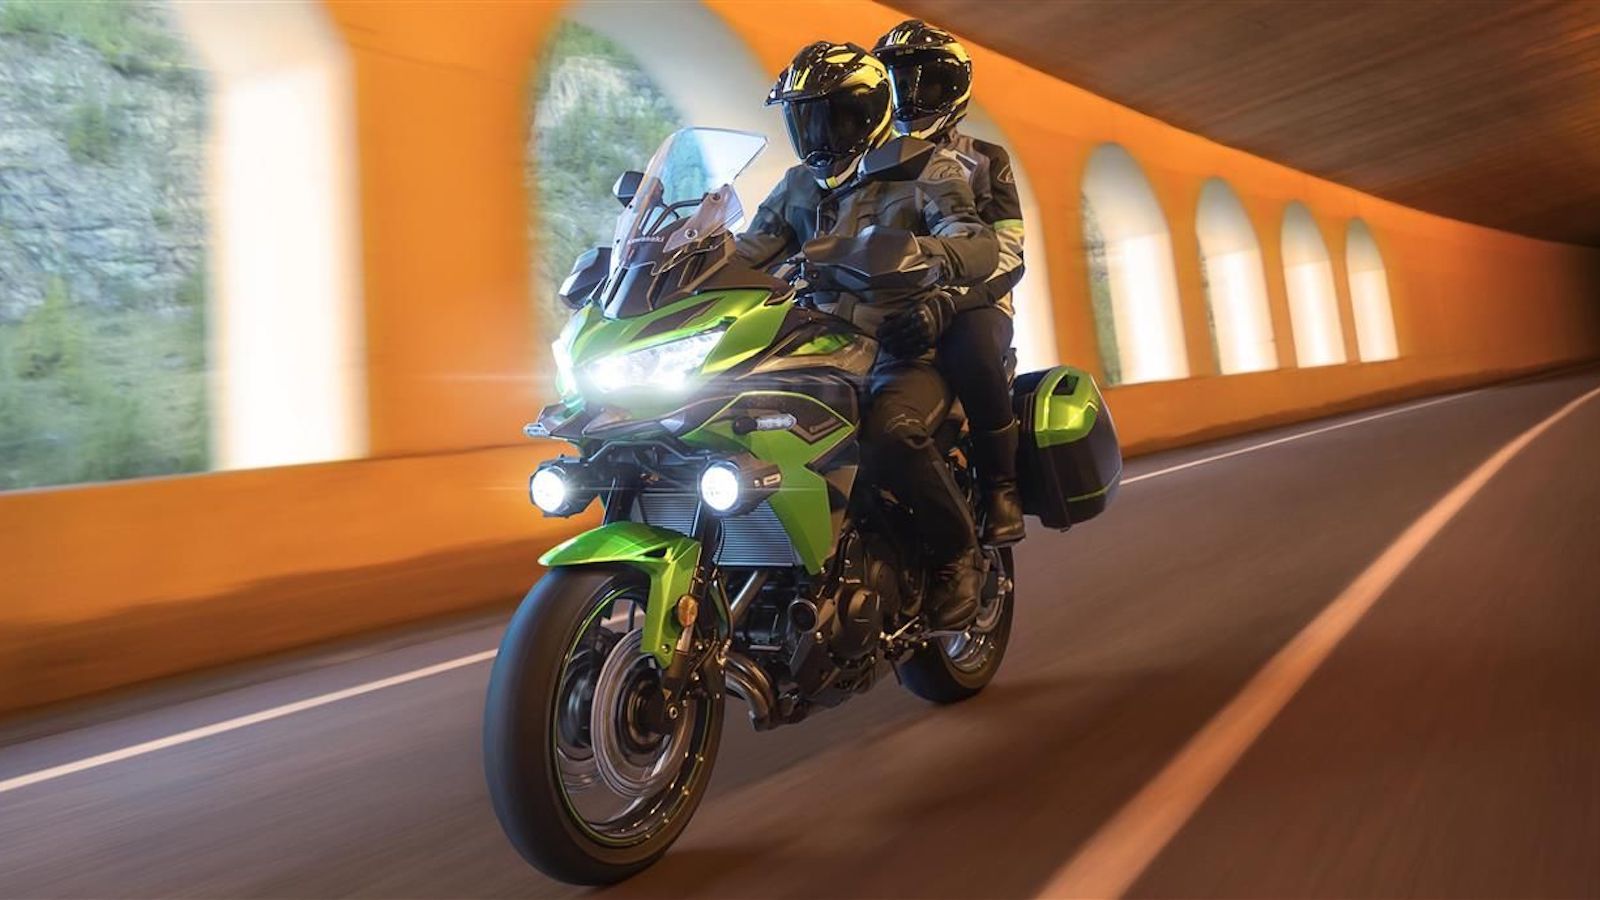 10 Reasons Why The Kawasaki Versys 650 Is The Ultimate Middleweight Touring Bike